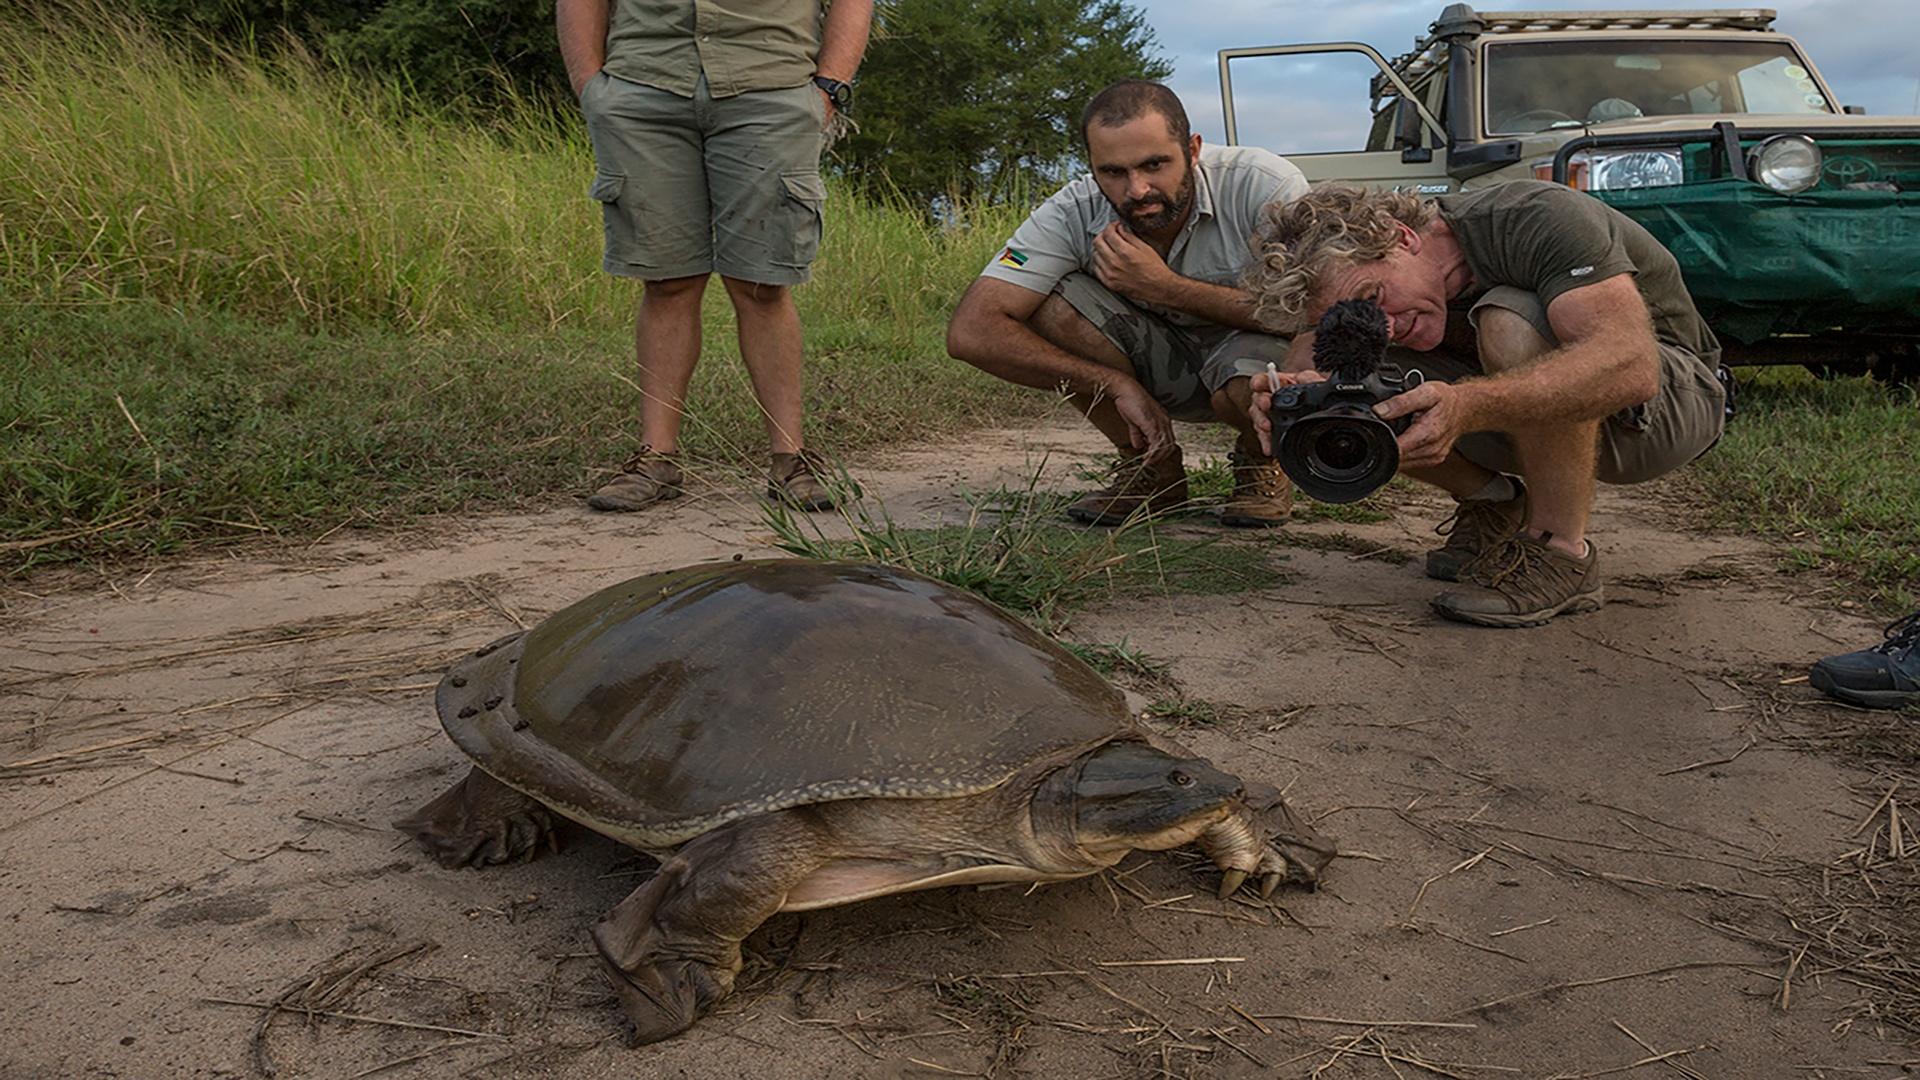 A soft-shelled turtle stops the team in its tracks as it makes its way across the dirt road. 